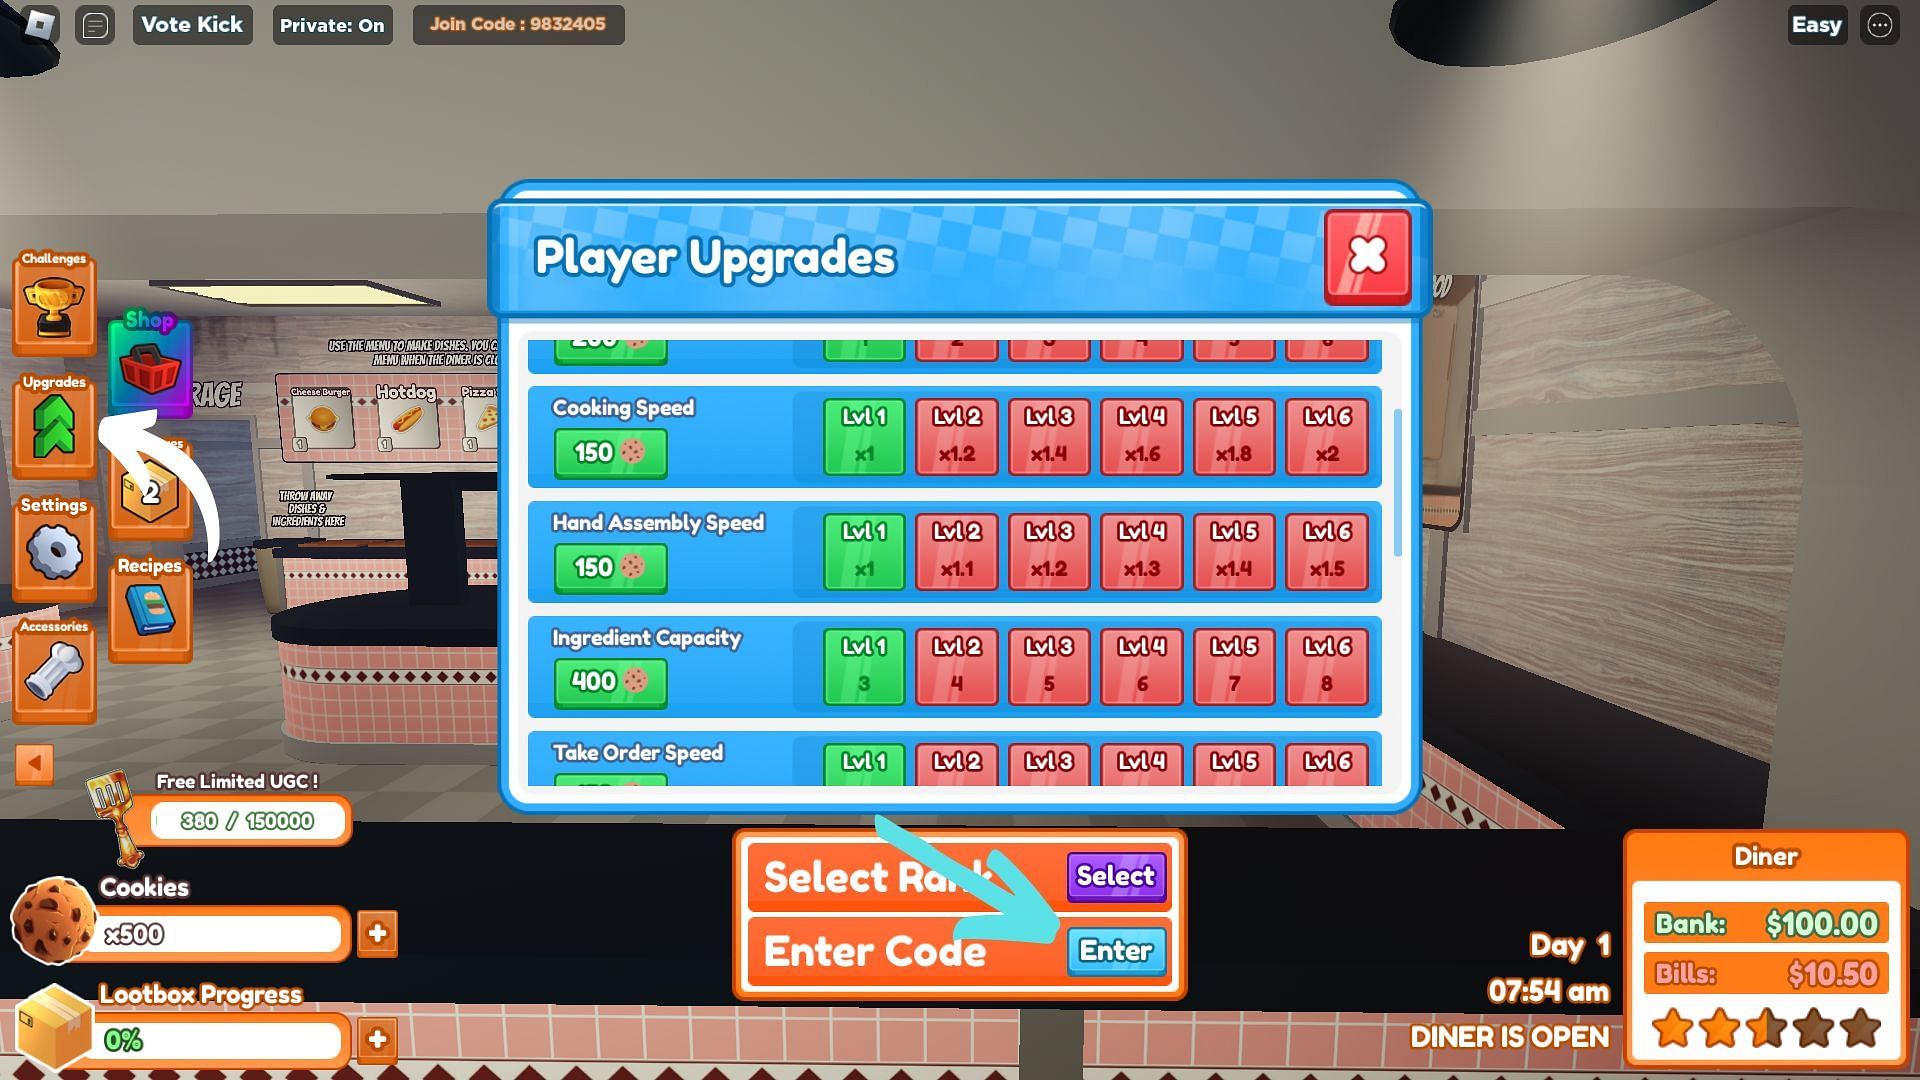 How to redeem codes for Diner Simulator (Image via Roblox and Sportskeeda)